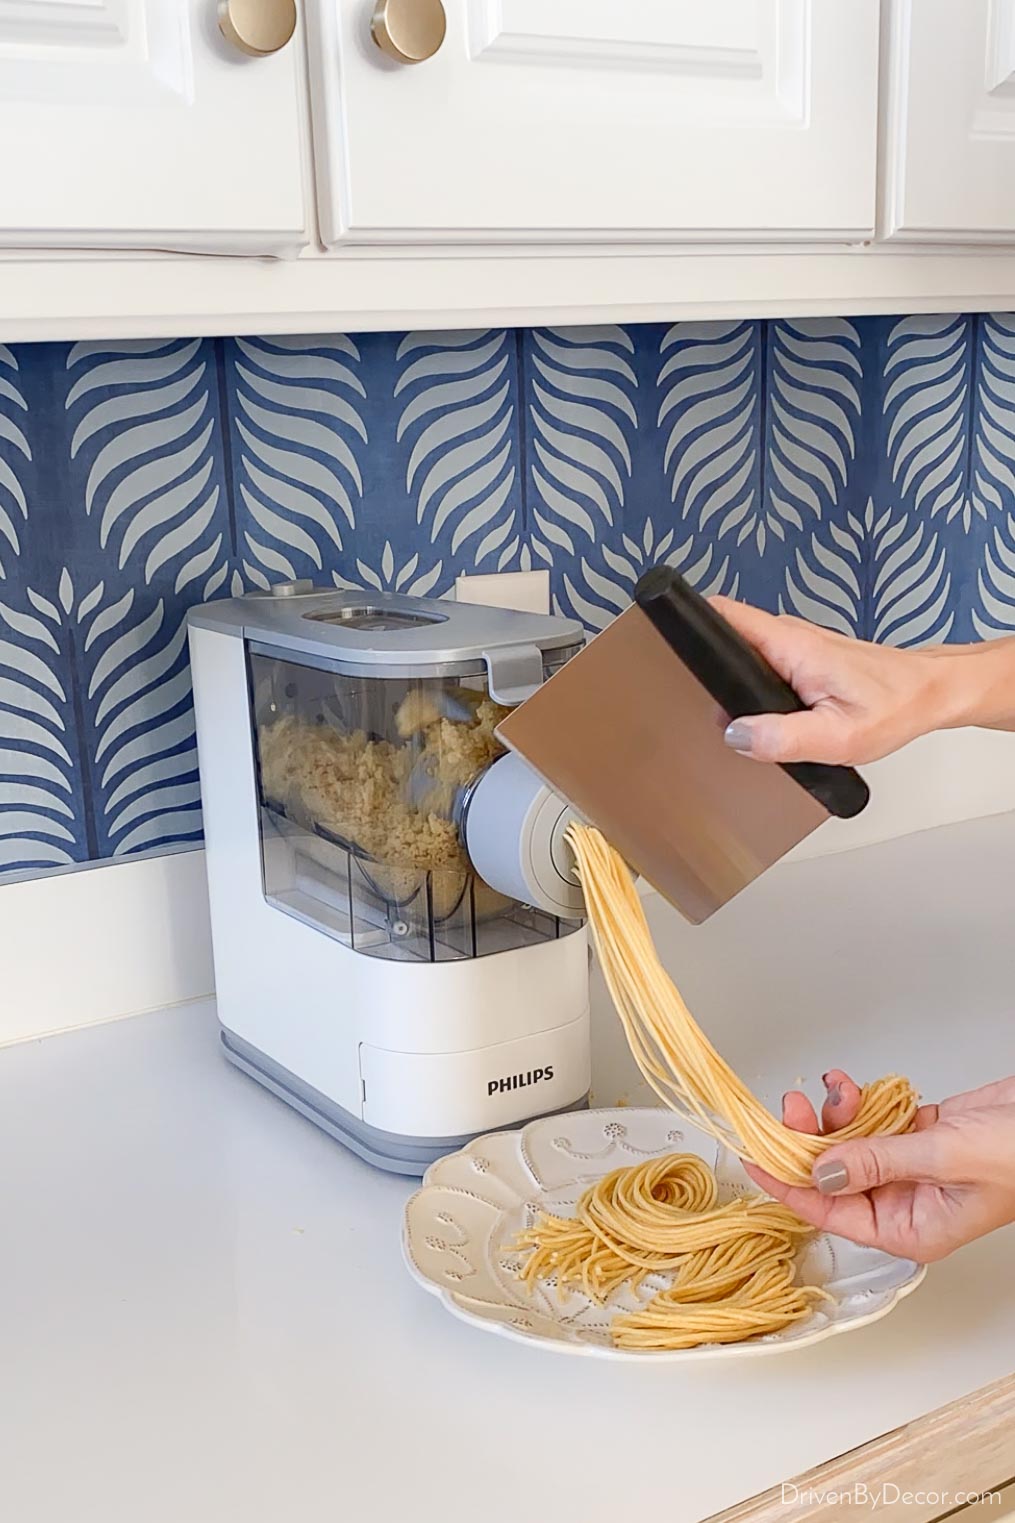 Cutting off the pasta as it comes out of the pasta making machine